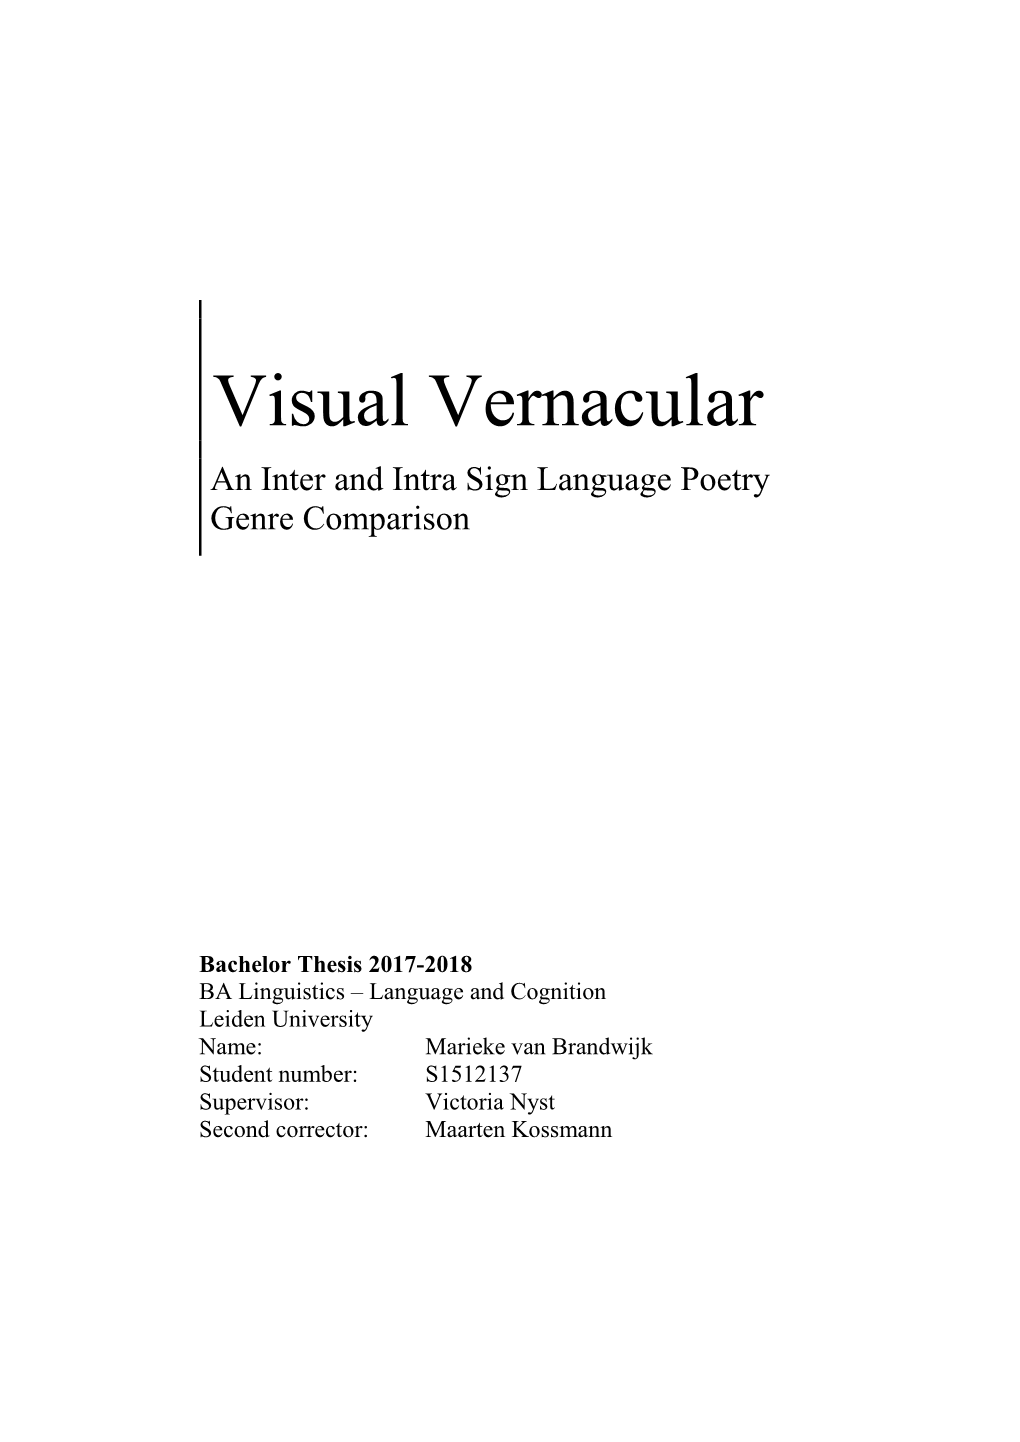 Visual Vernacular an Inter and Intra Sign Language Poetry Genre Comparison